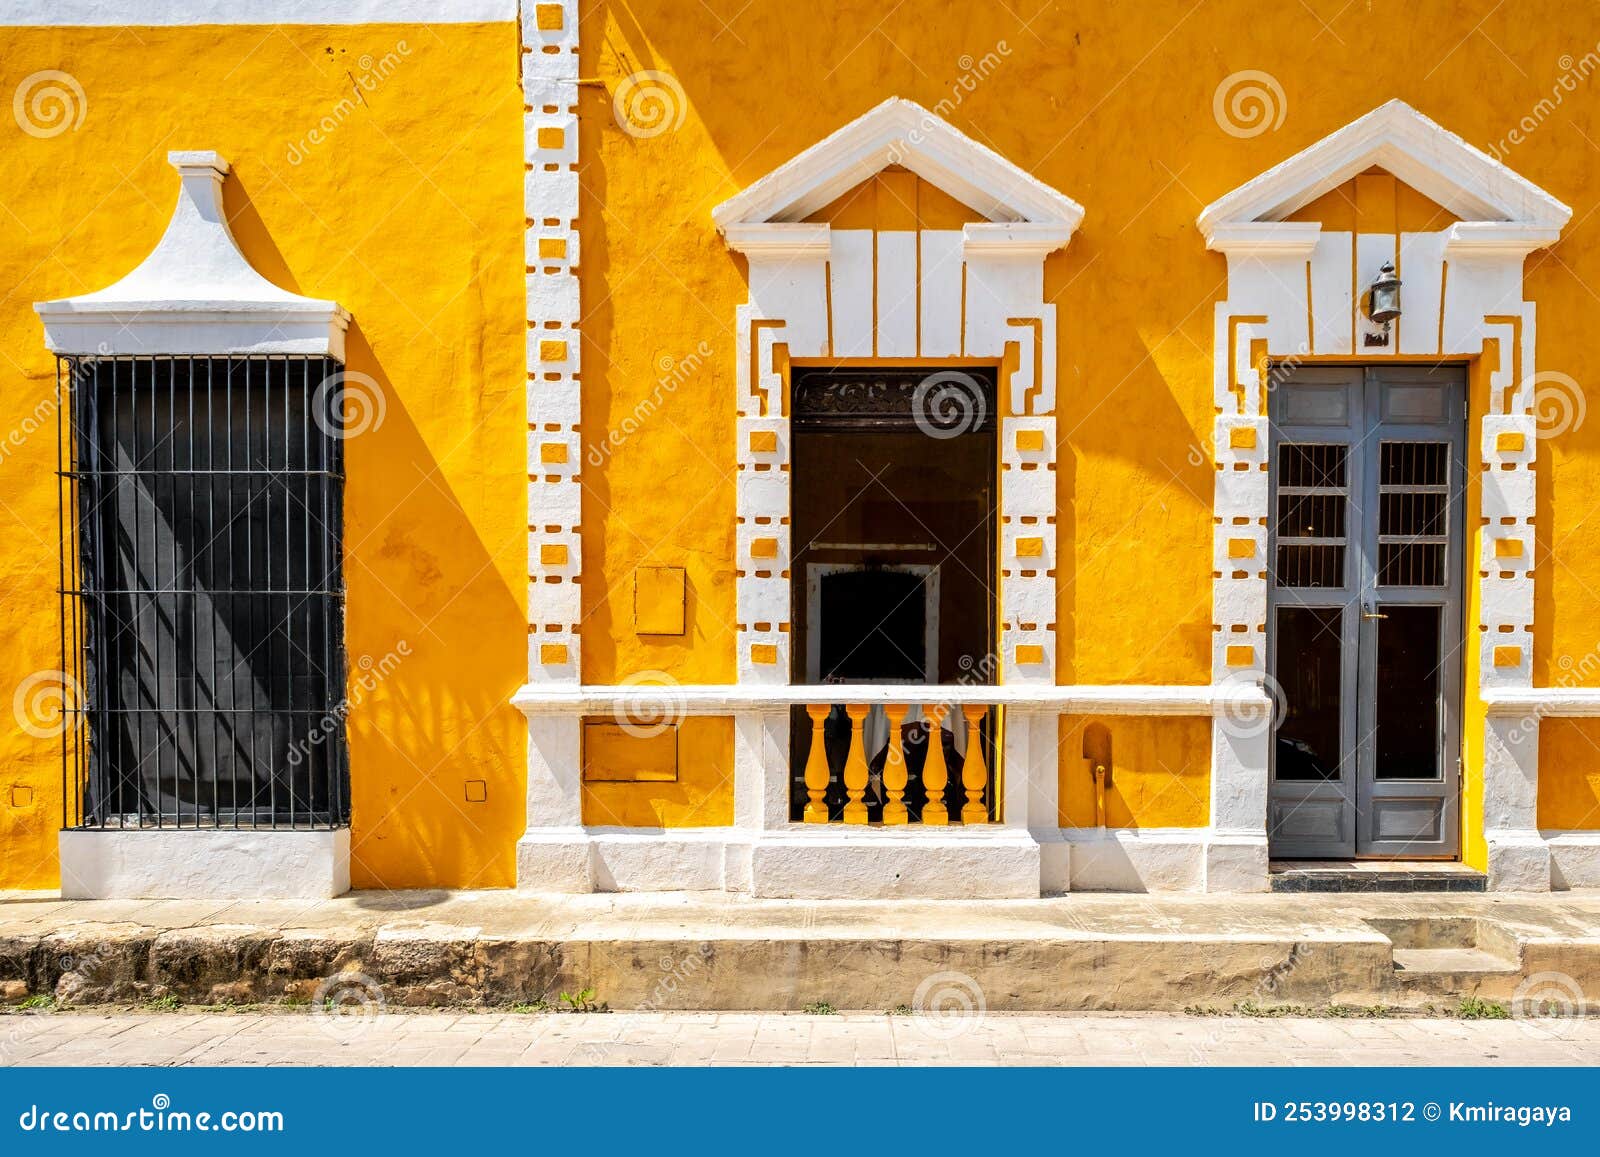 typical old yellow house at the magical town of izamal in yucatan